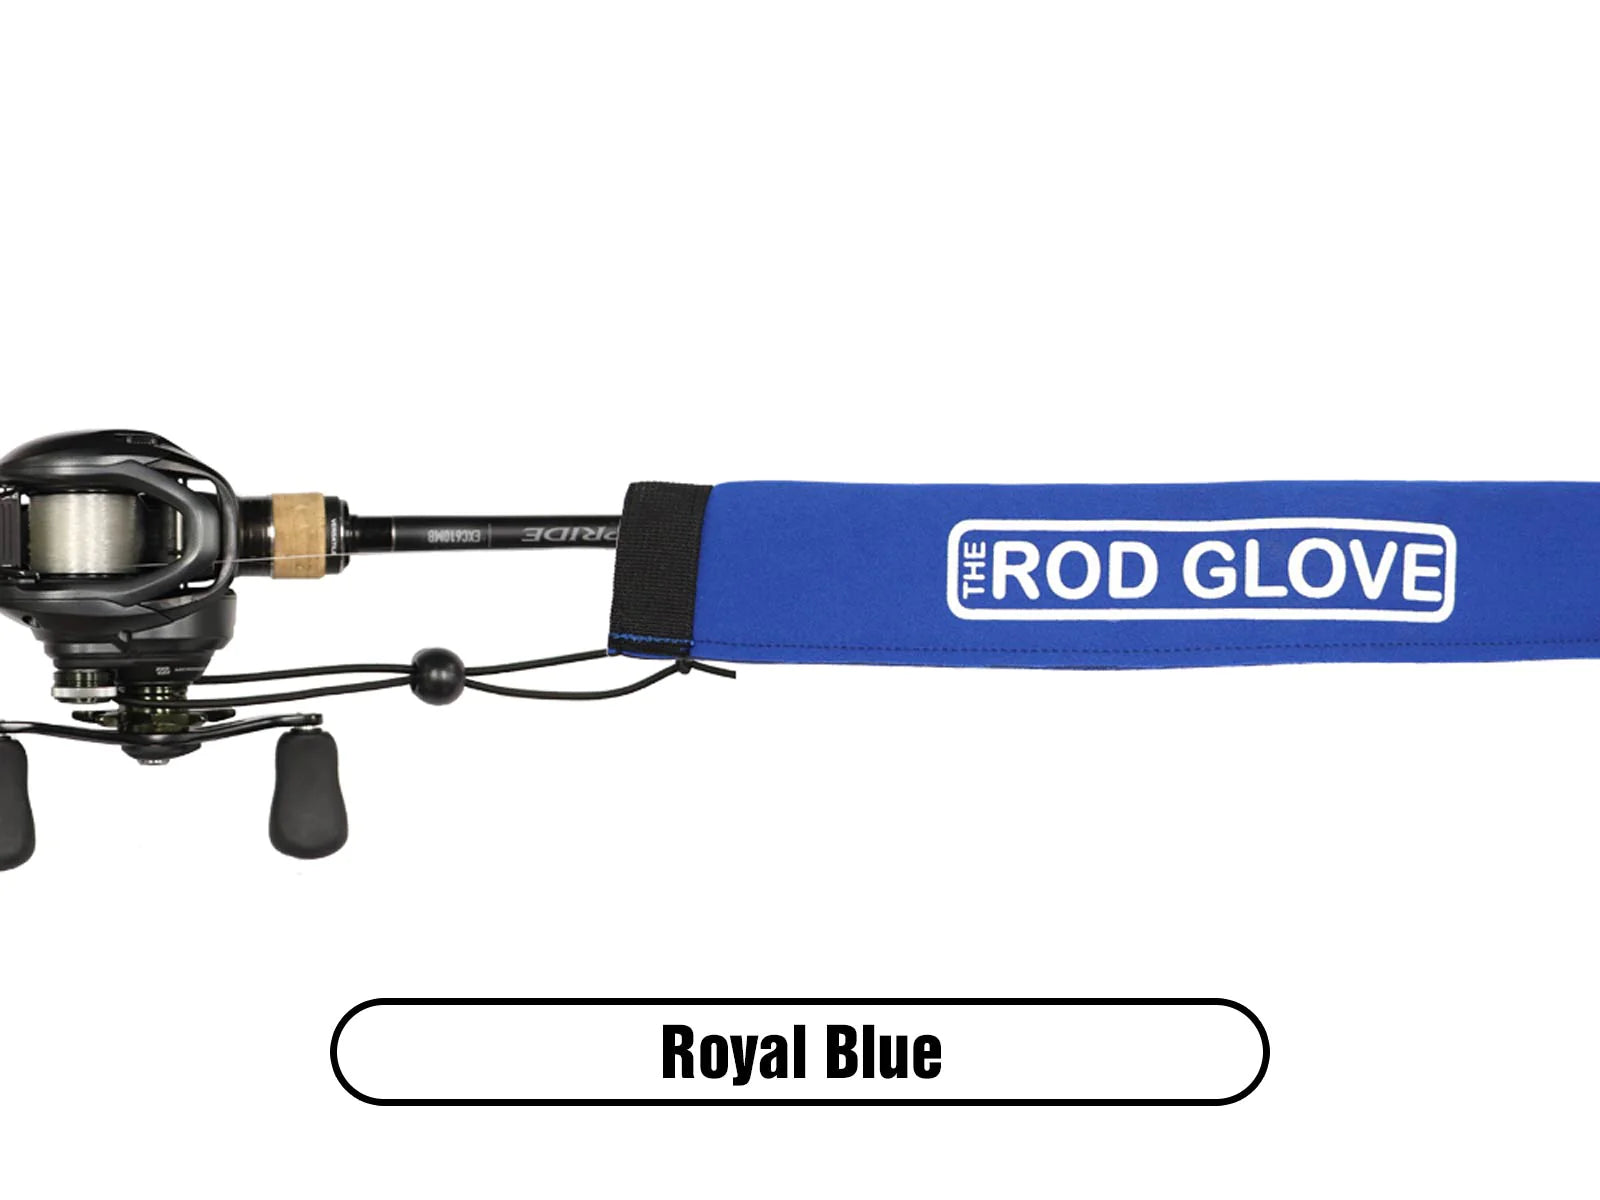 Buy royal-blue THE ROD GLOVE TOURNAMENT SERIES CASTING ROD GLOVE